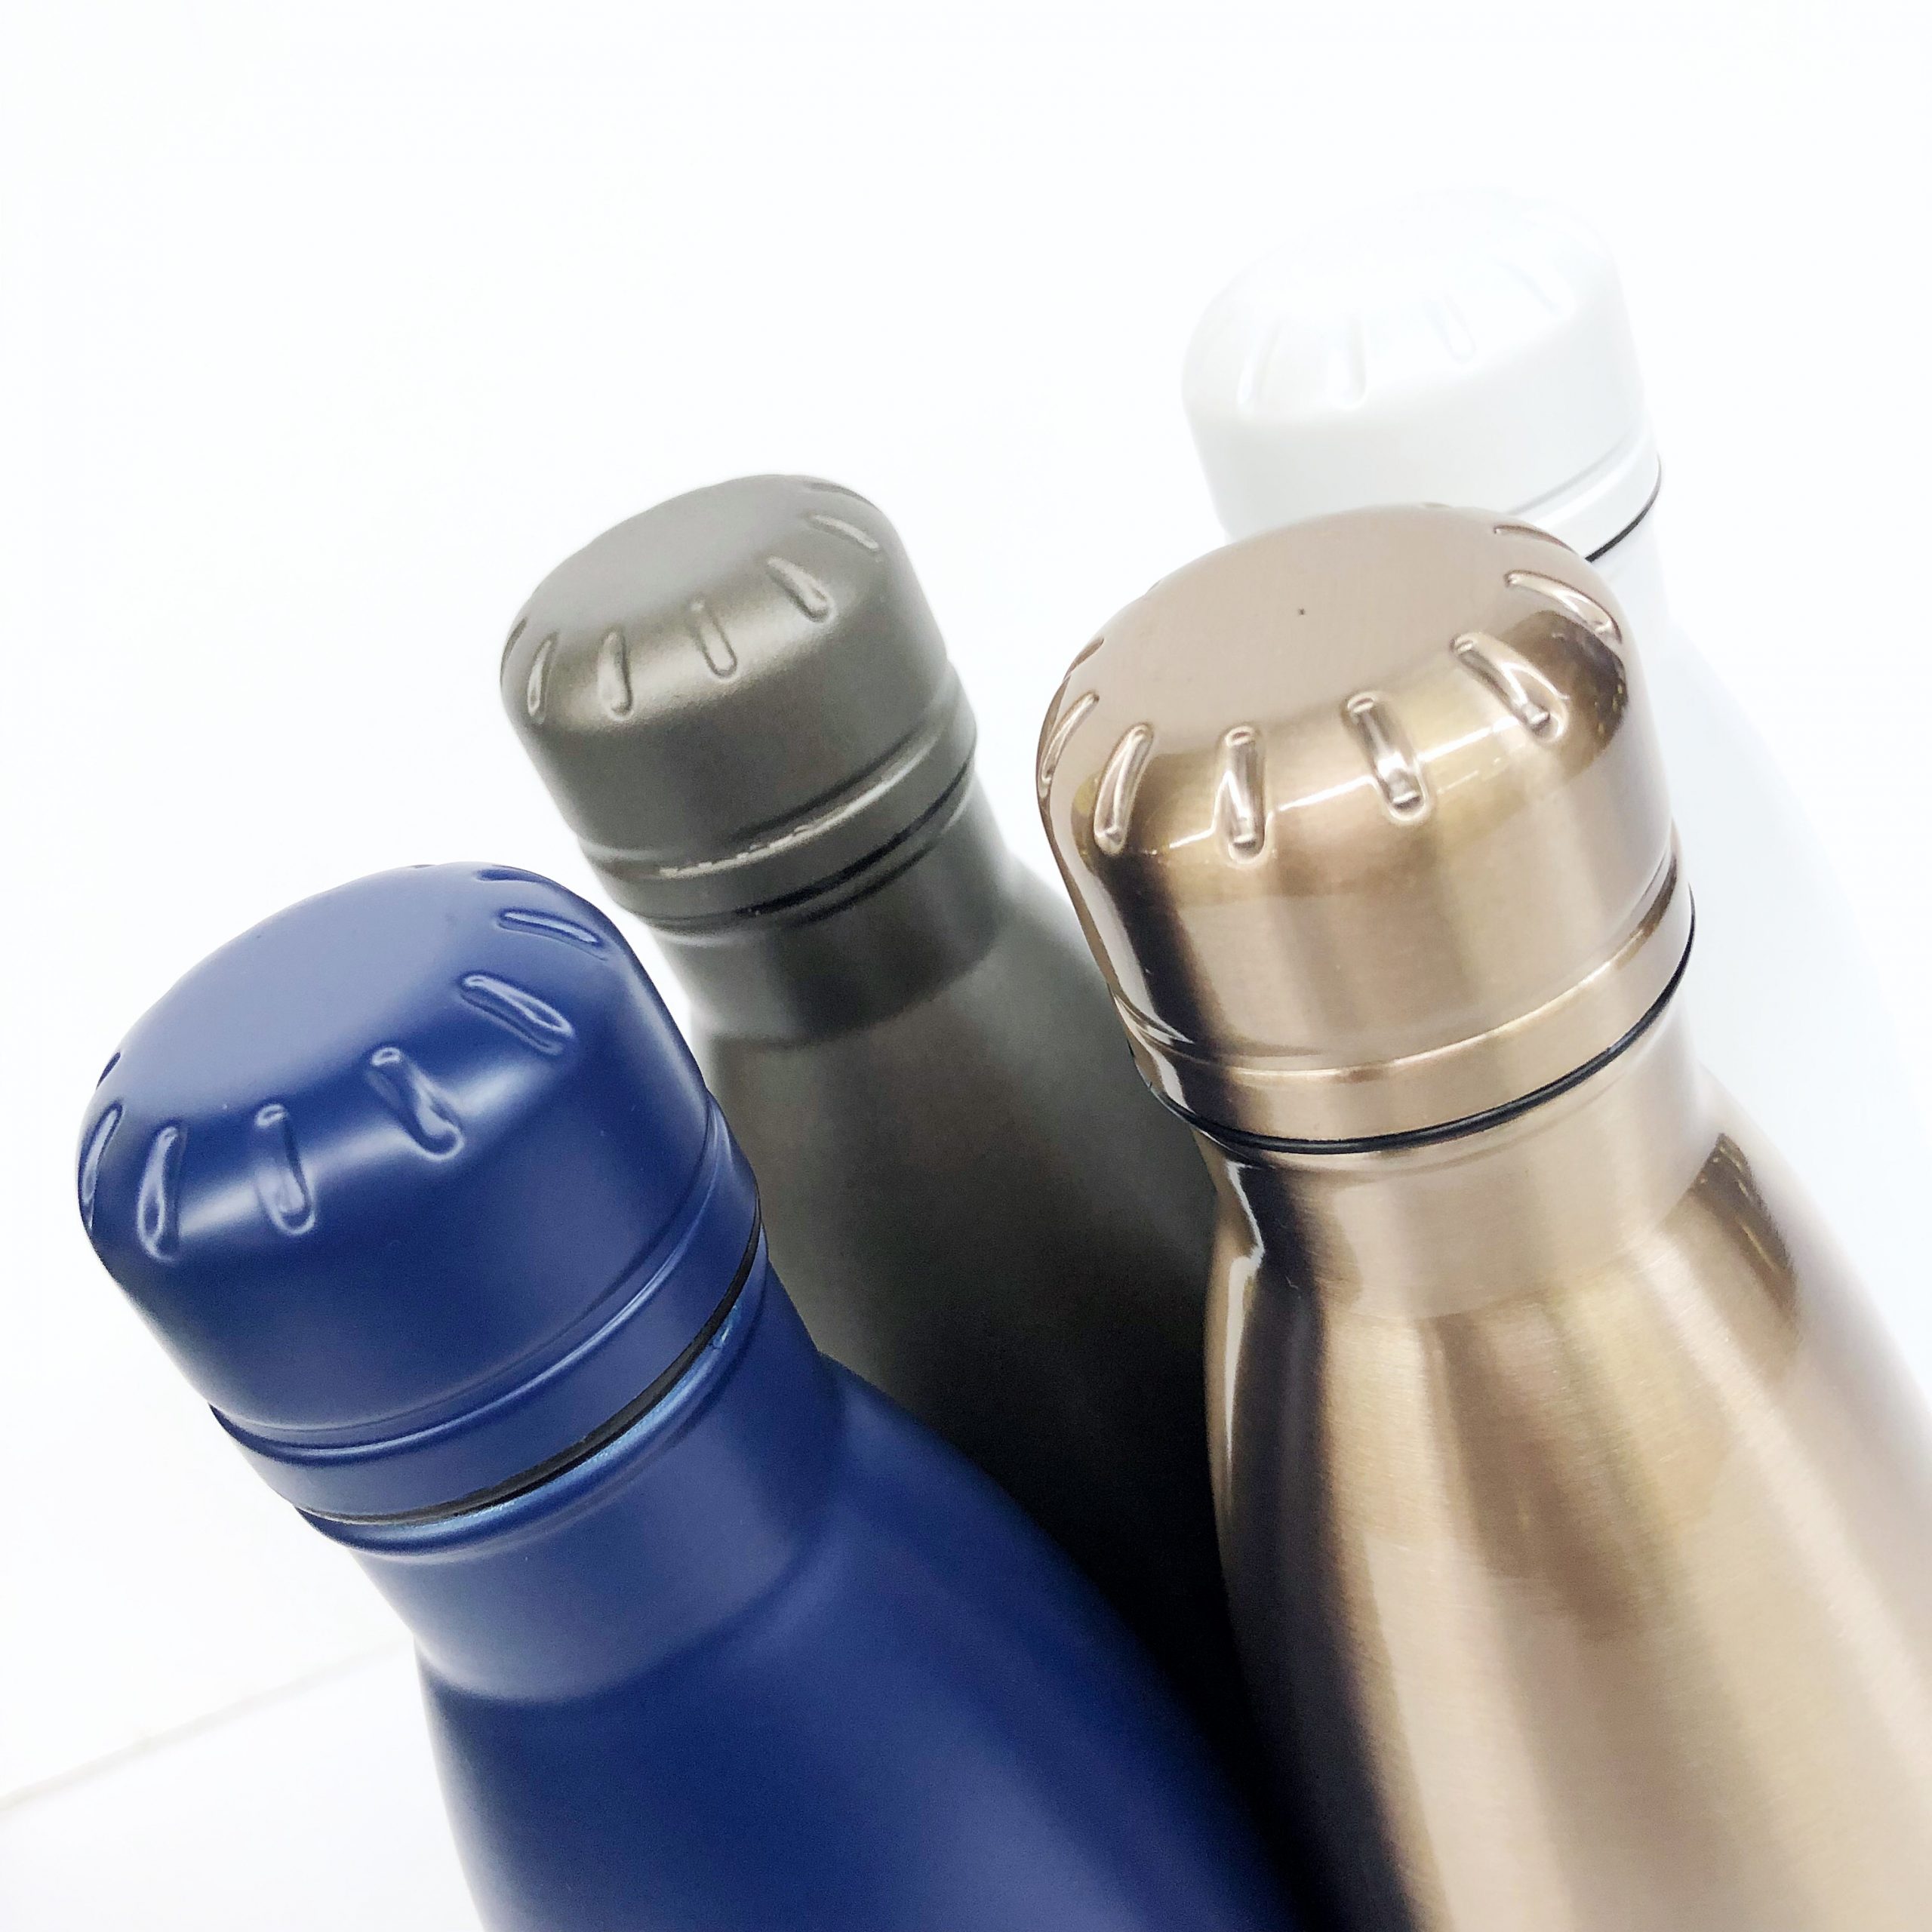 https://www.national5and10.com/wp-content/uploads/2019/06/University-of-Delaware-Insulated-22Swell22-Style-Water-Bottle-2-scaled.jpg